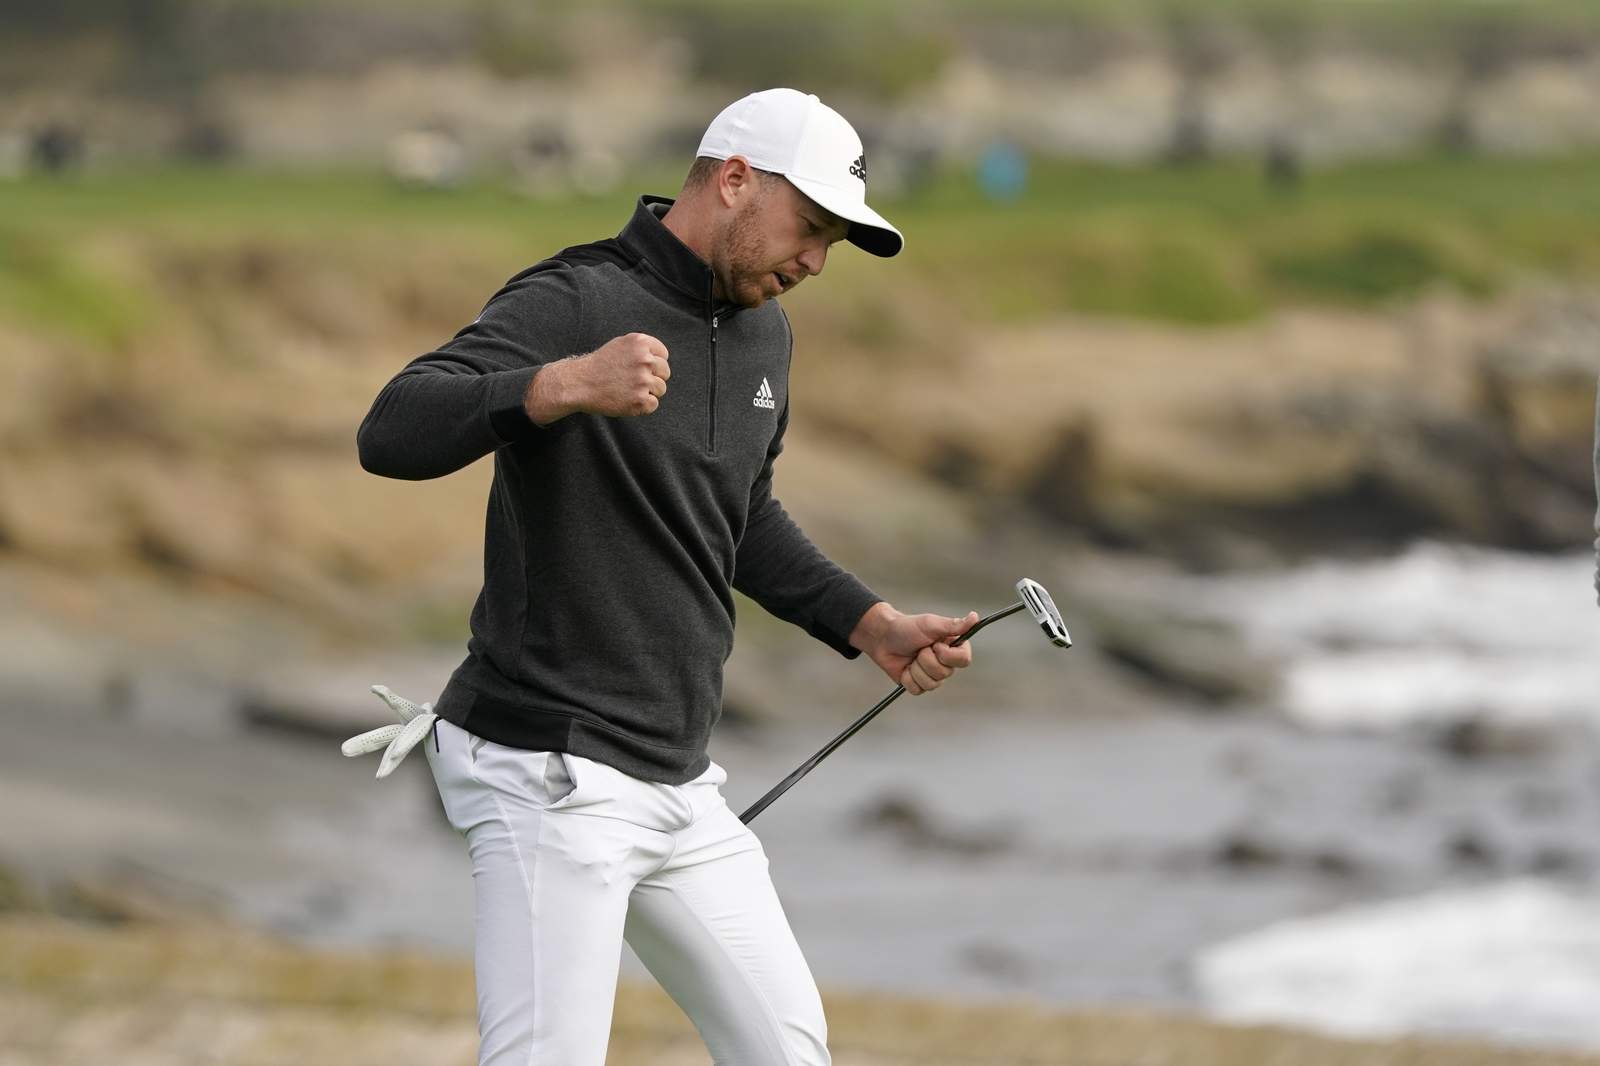 Daniel Berger has the final say and wins at Pebble Beach